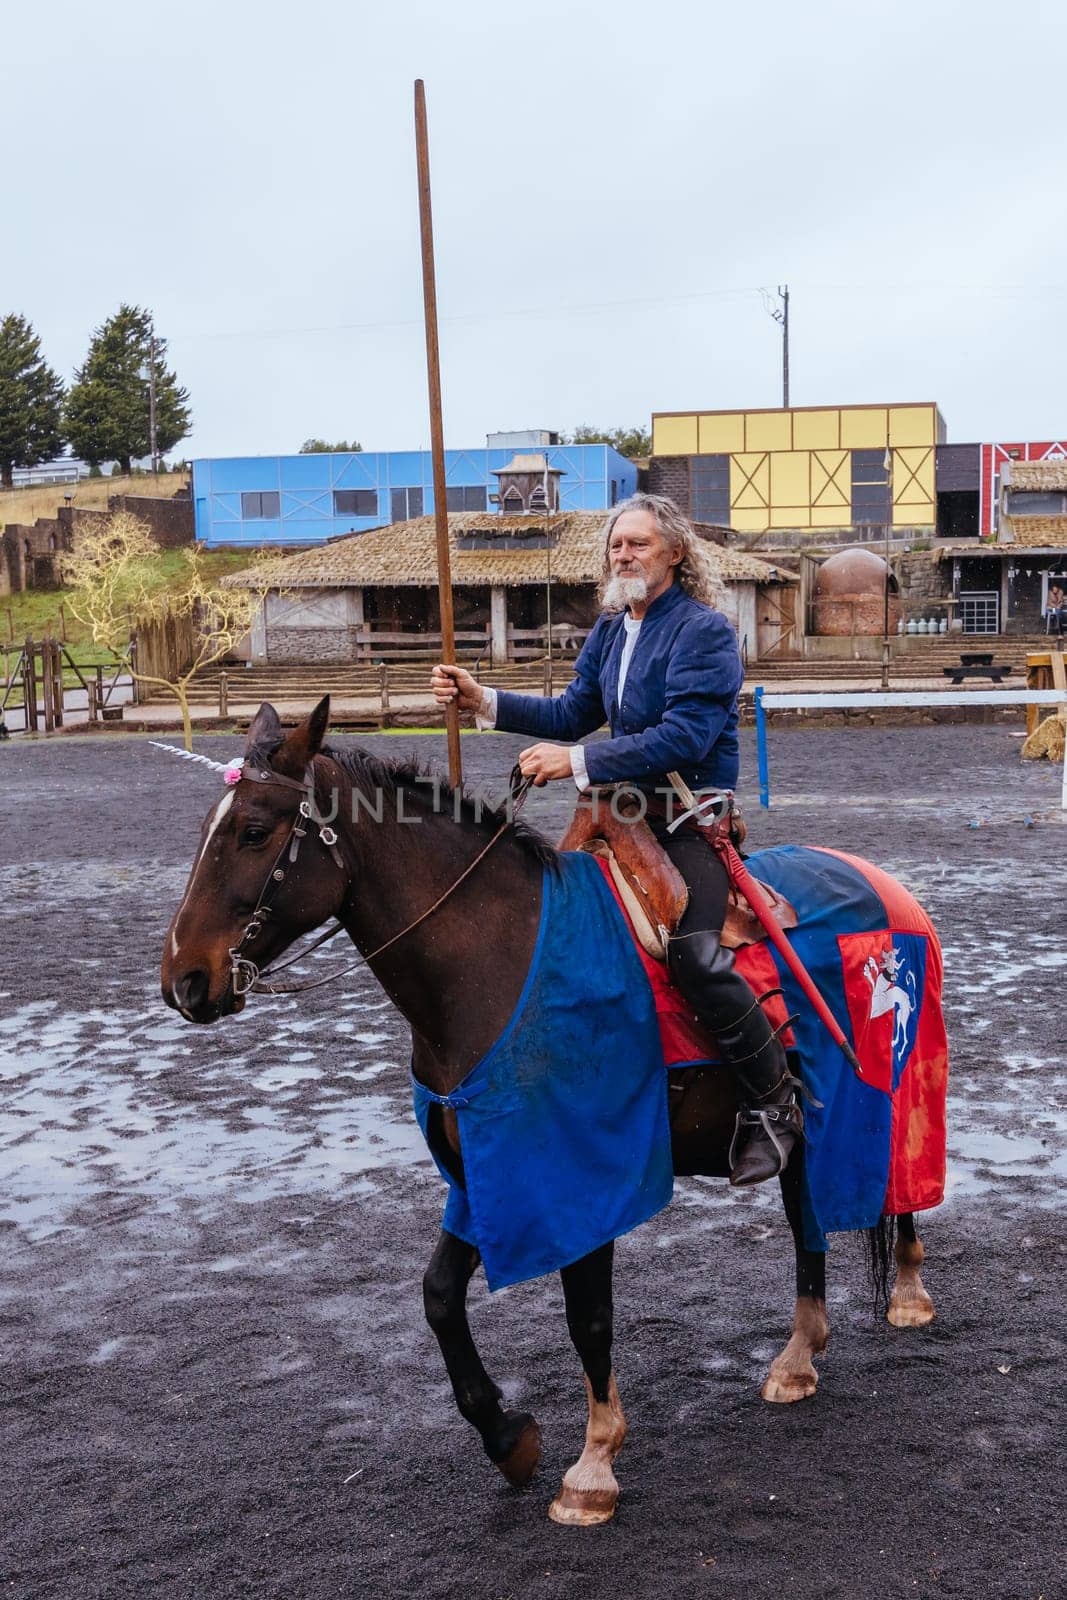 BALLARAT, AUSTRALIA - April 7 2023: Medieval horse show at the popular tourism destination of Kryal Castle which is a medieval village near the country Victorian town of Ballarat on a stormy autumn morning